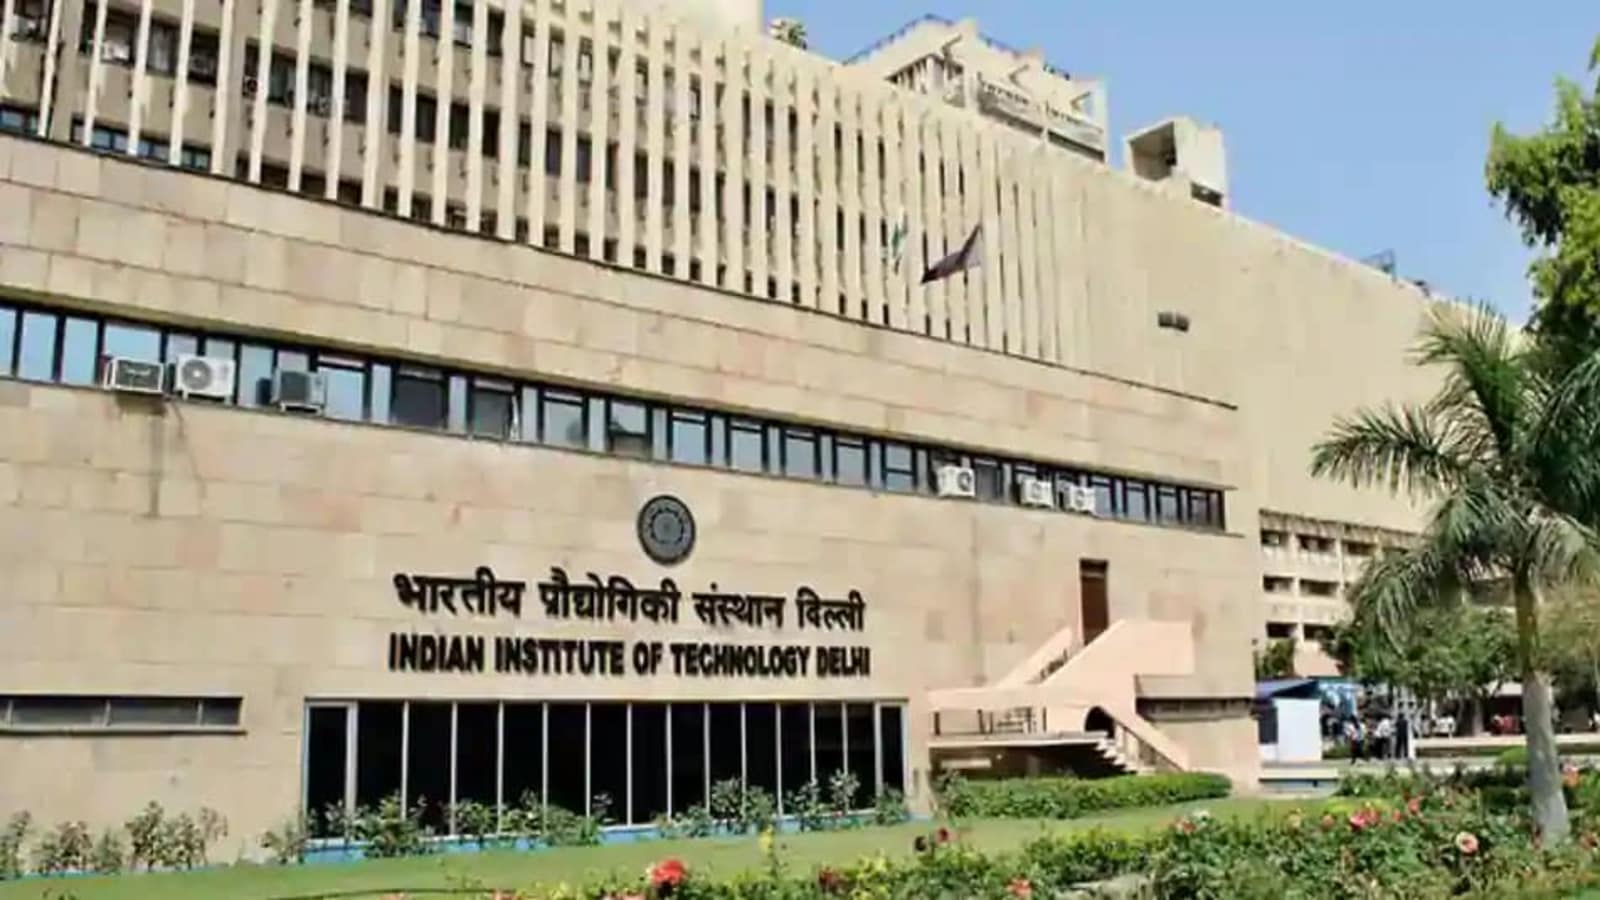 IIT Delhi Recruitment 2022: Check Post, Qualification and Other Details